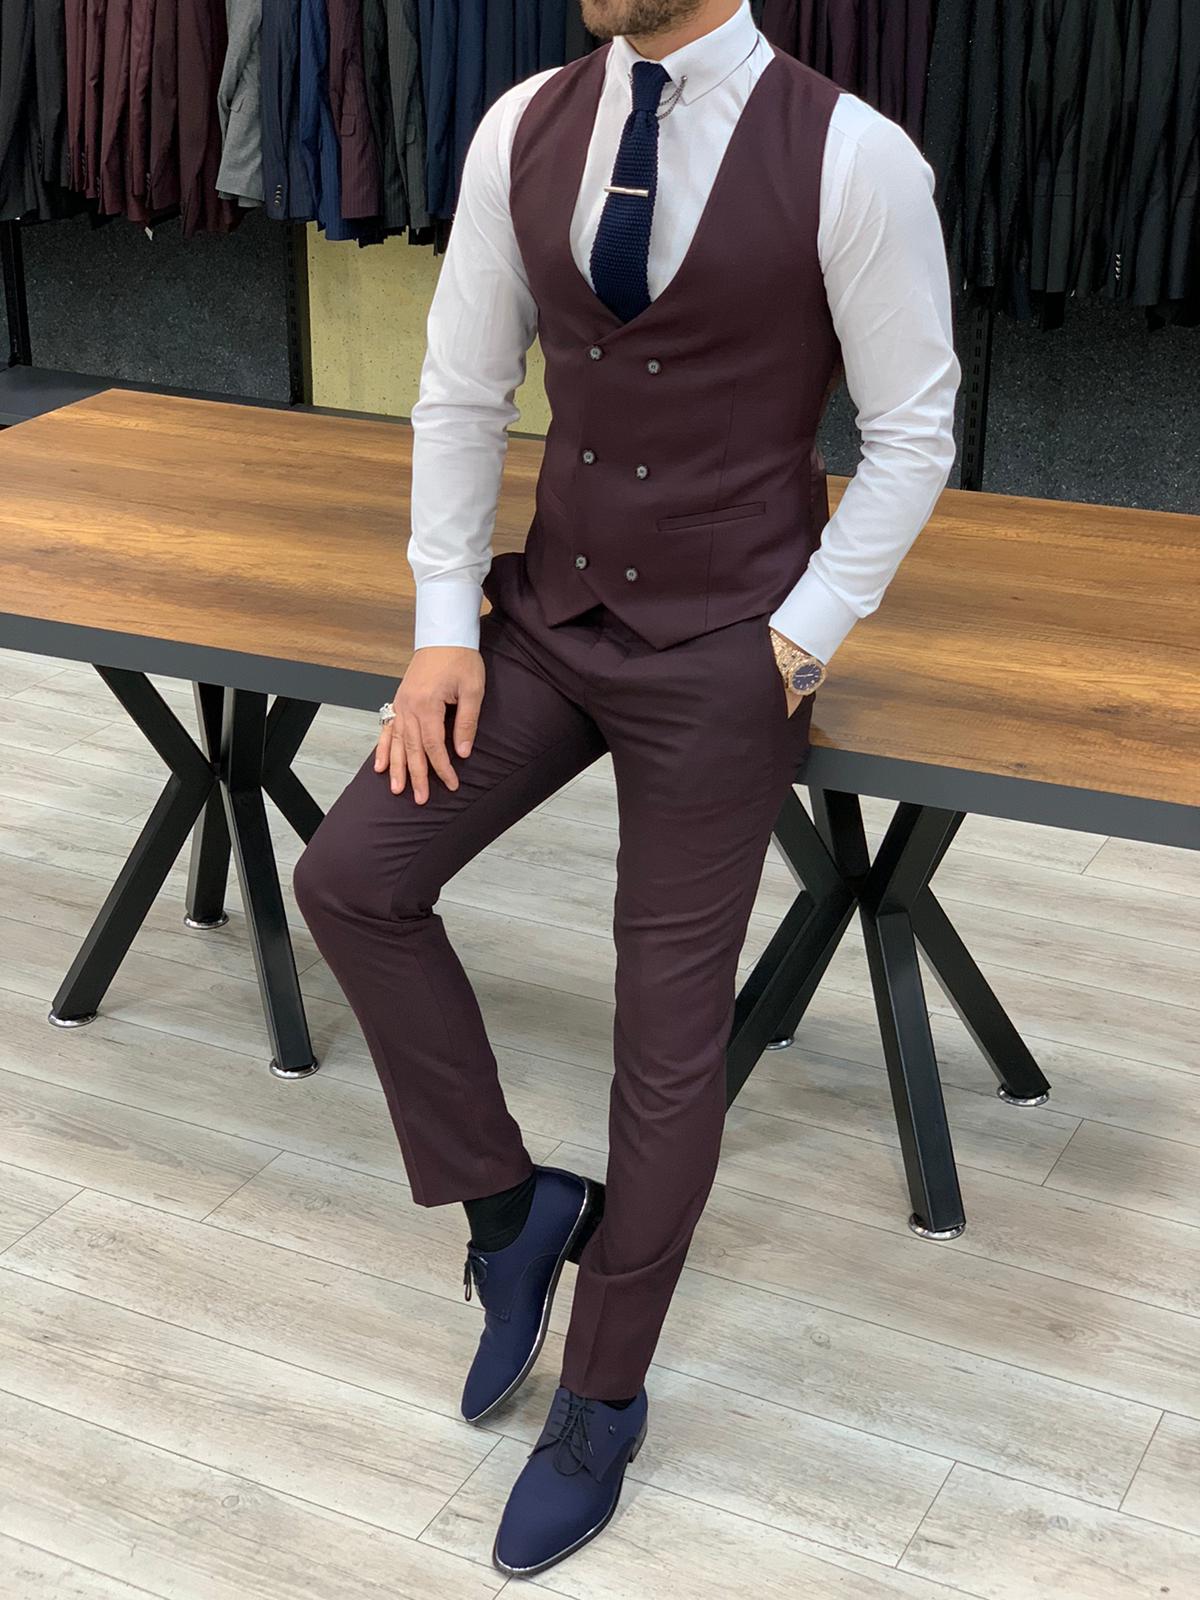 Buy Burgundy Slim Fit Pinstripe Suit by GentWith.com with Free Shipping